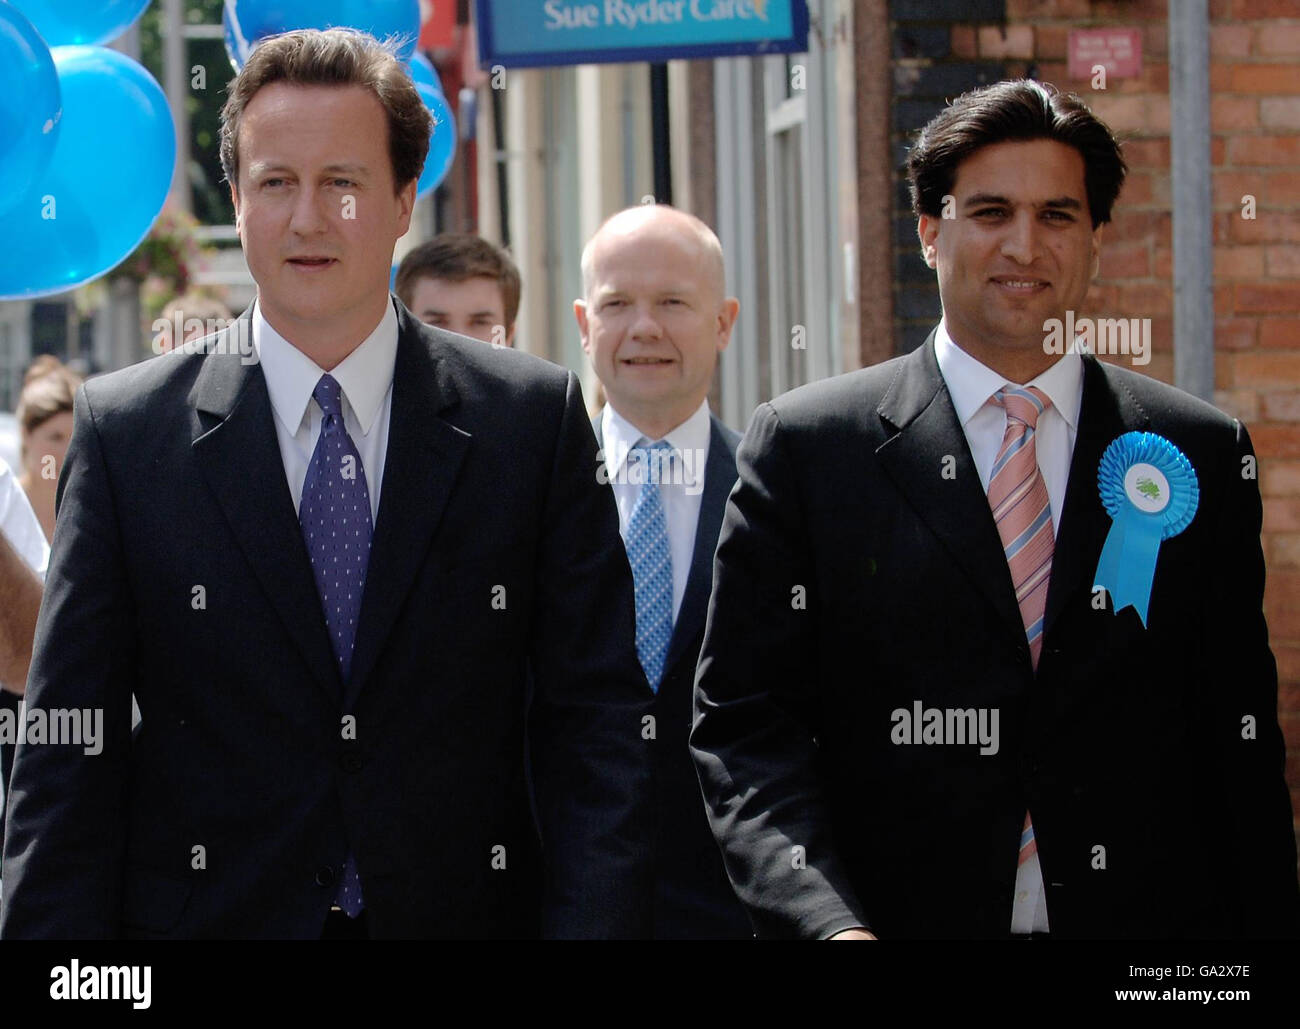 Conservative Party leader David Cameron (left) campaigns for the council by-election in Ealing, west London today with Tory candidate Tony Lit (right) and shadow Foreign Secretary William Hague (centre). Stock Photo